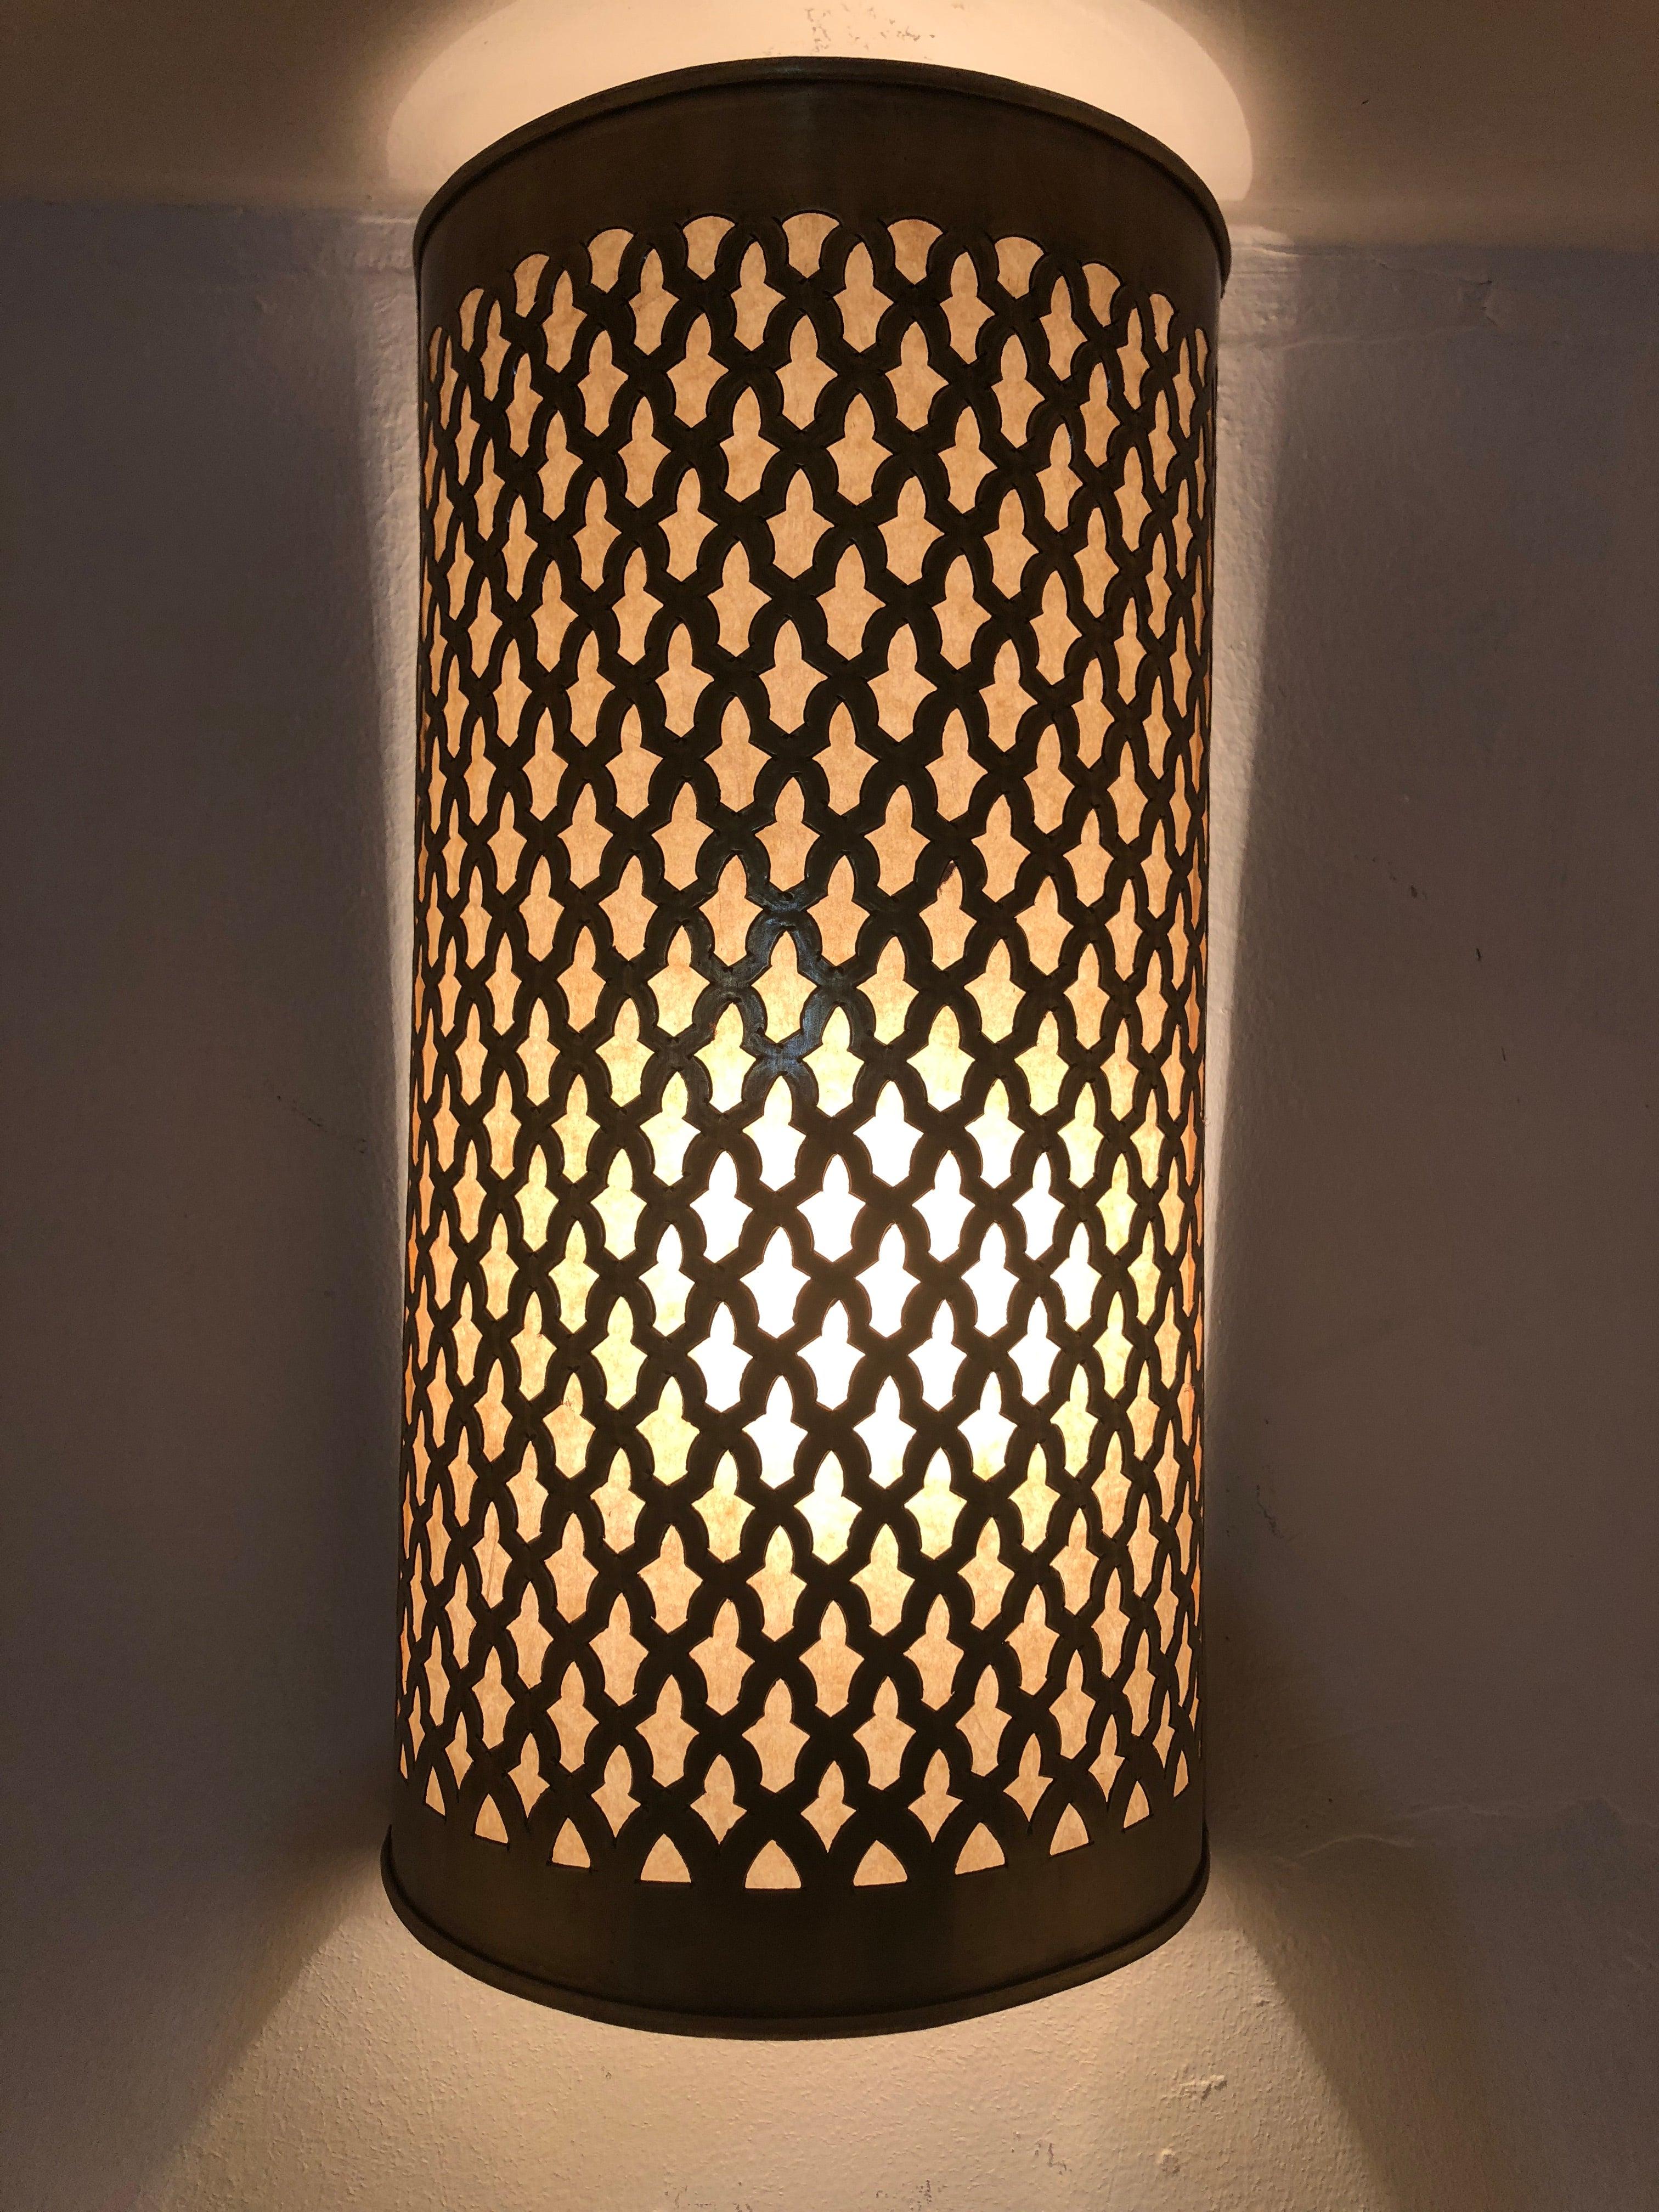 The wall lantern features an exquisite filigree work with exotic design motif. The handcrafted gold brass wall lantern emit soft filtered light and will elevate the ambiance of any room. 
The sconce is not wired. It comes as a shell and can be